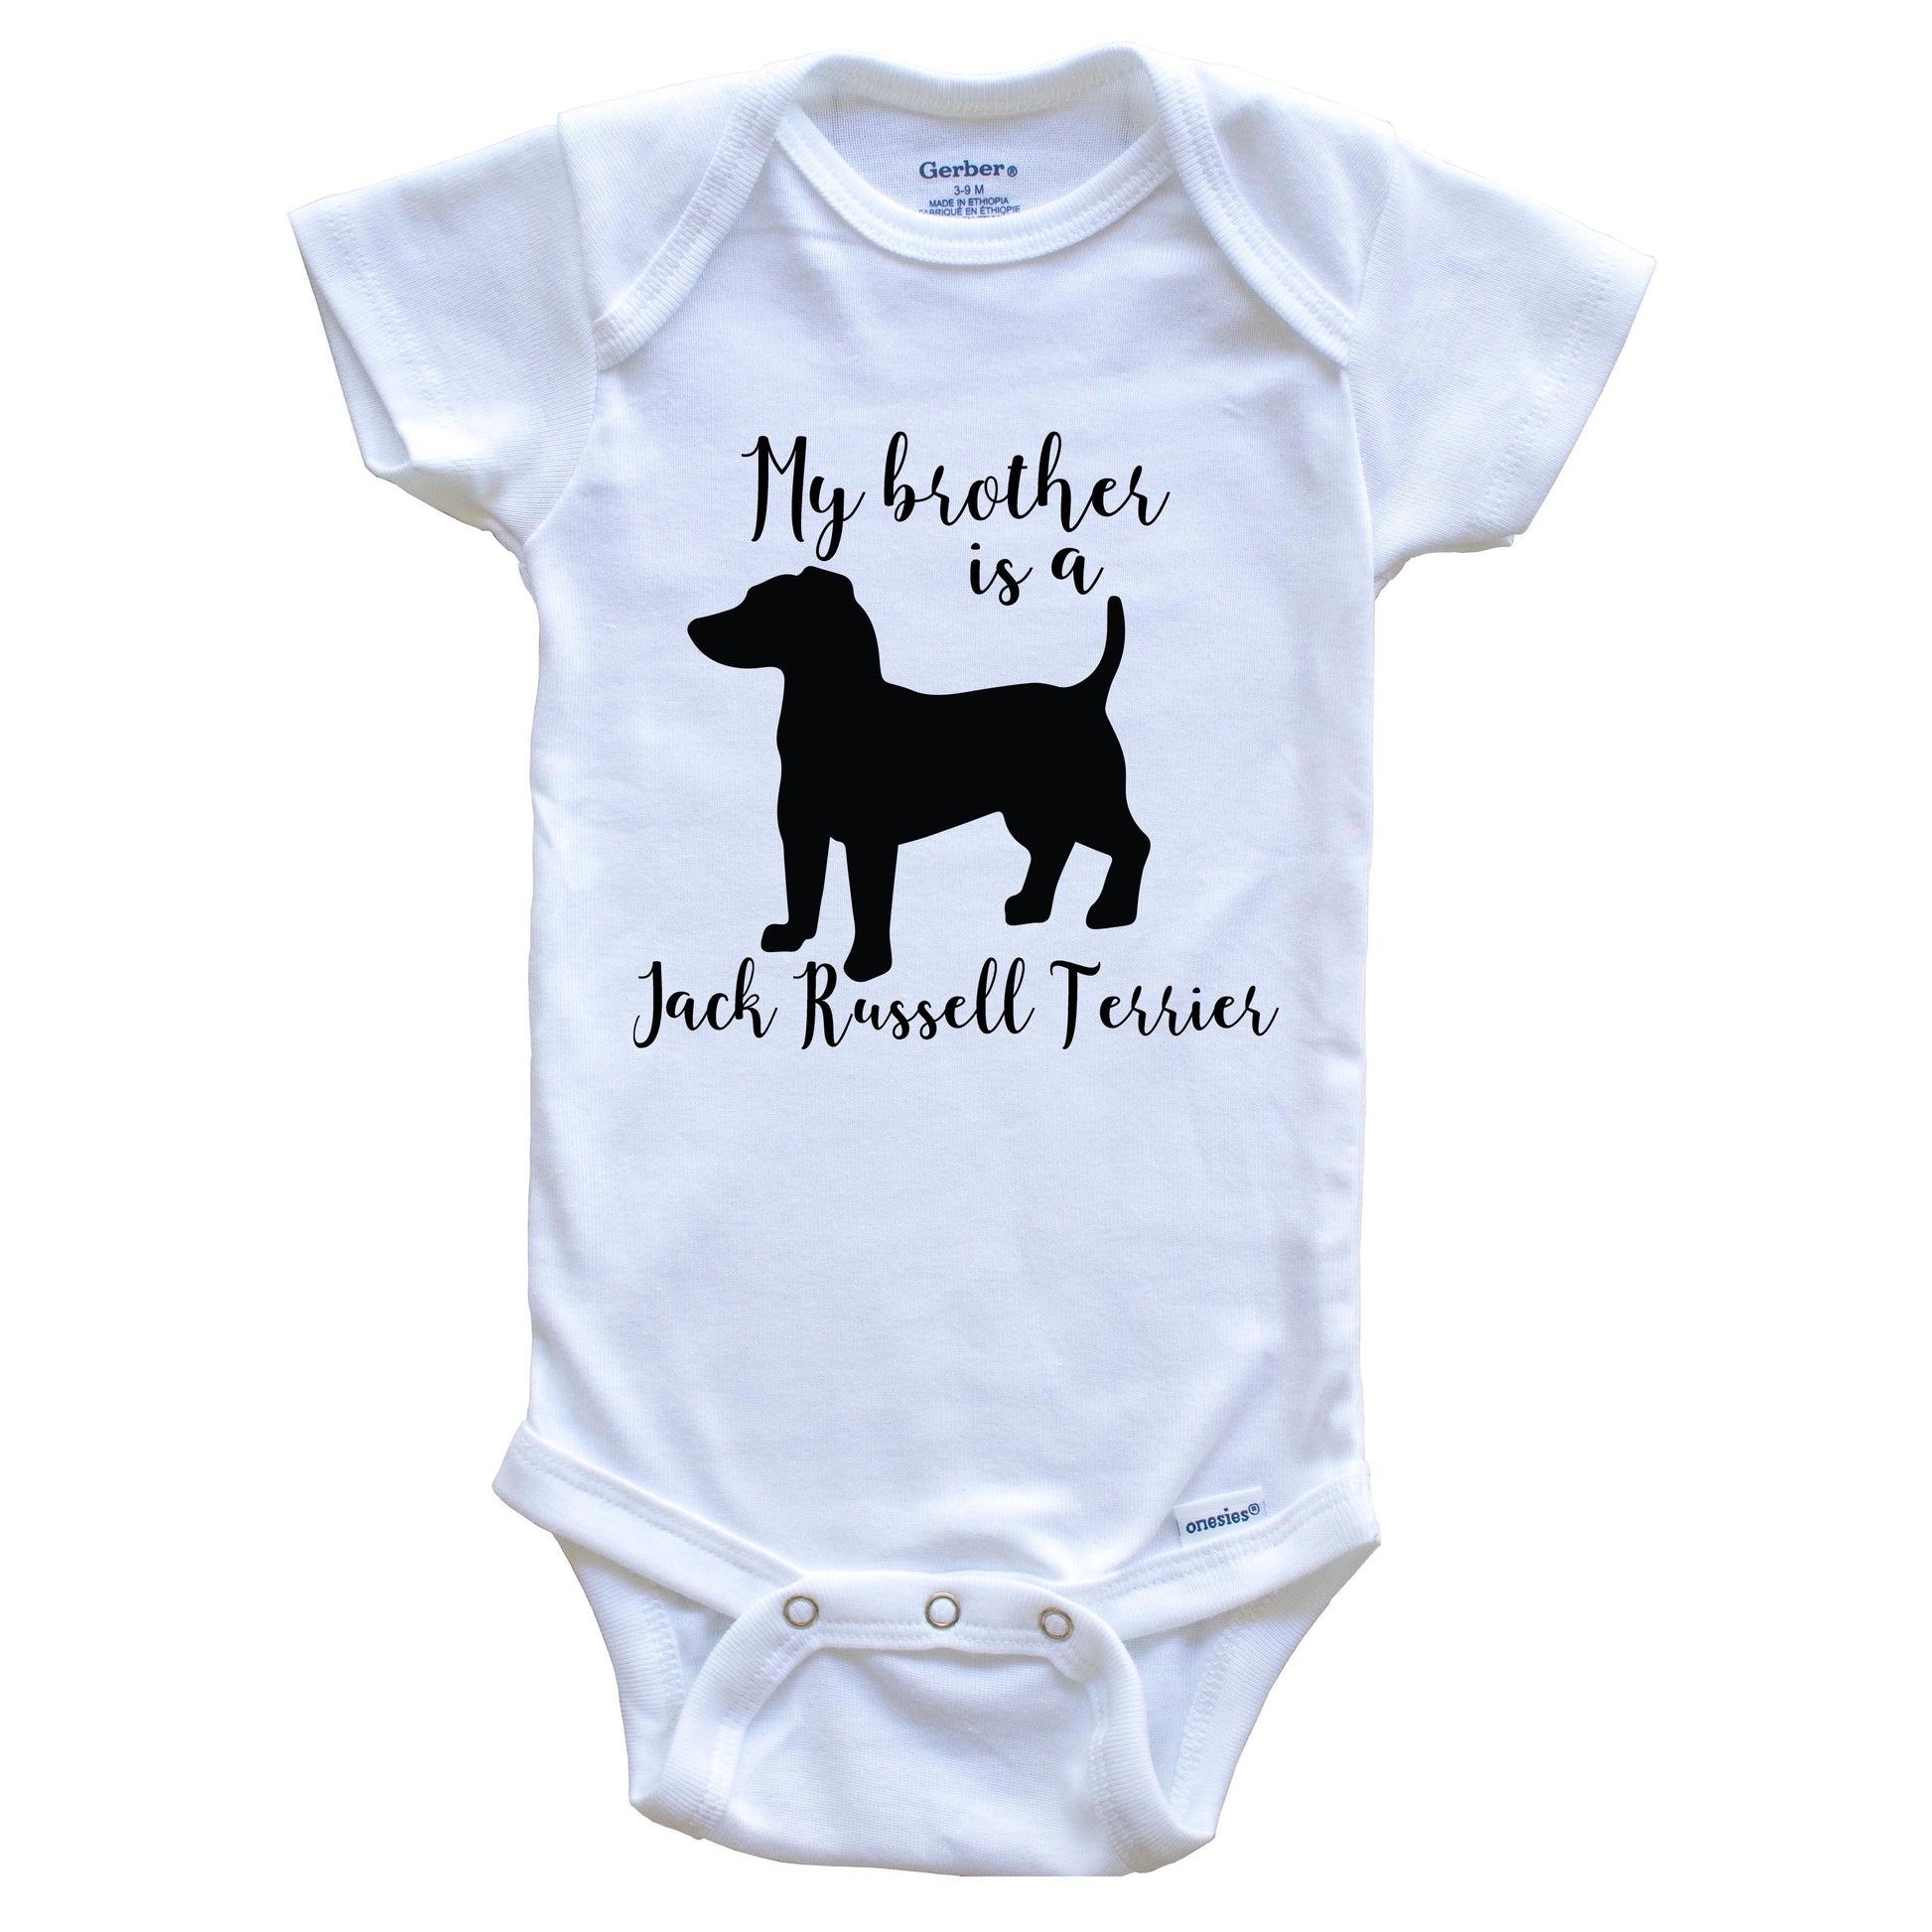 My Brother Is A Jack Russell Terrier Cute Dog Baby Onesie - Jack Russell Terrier One Piece Baby Bodysuit